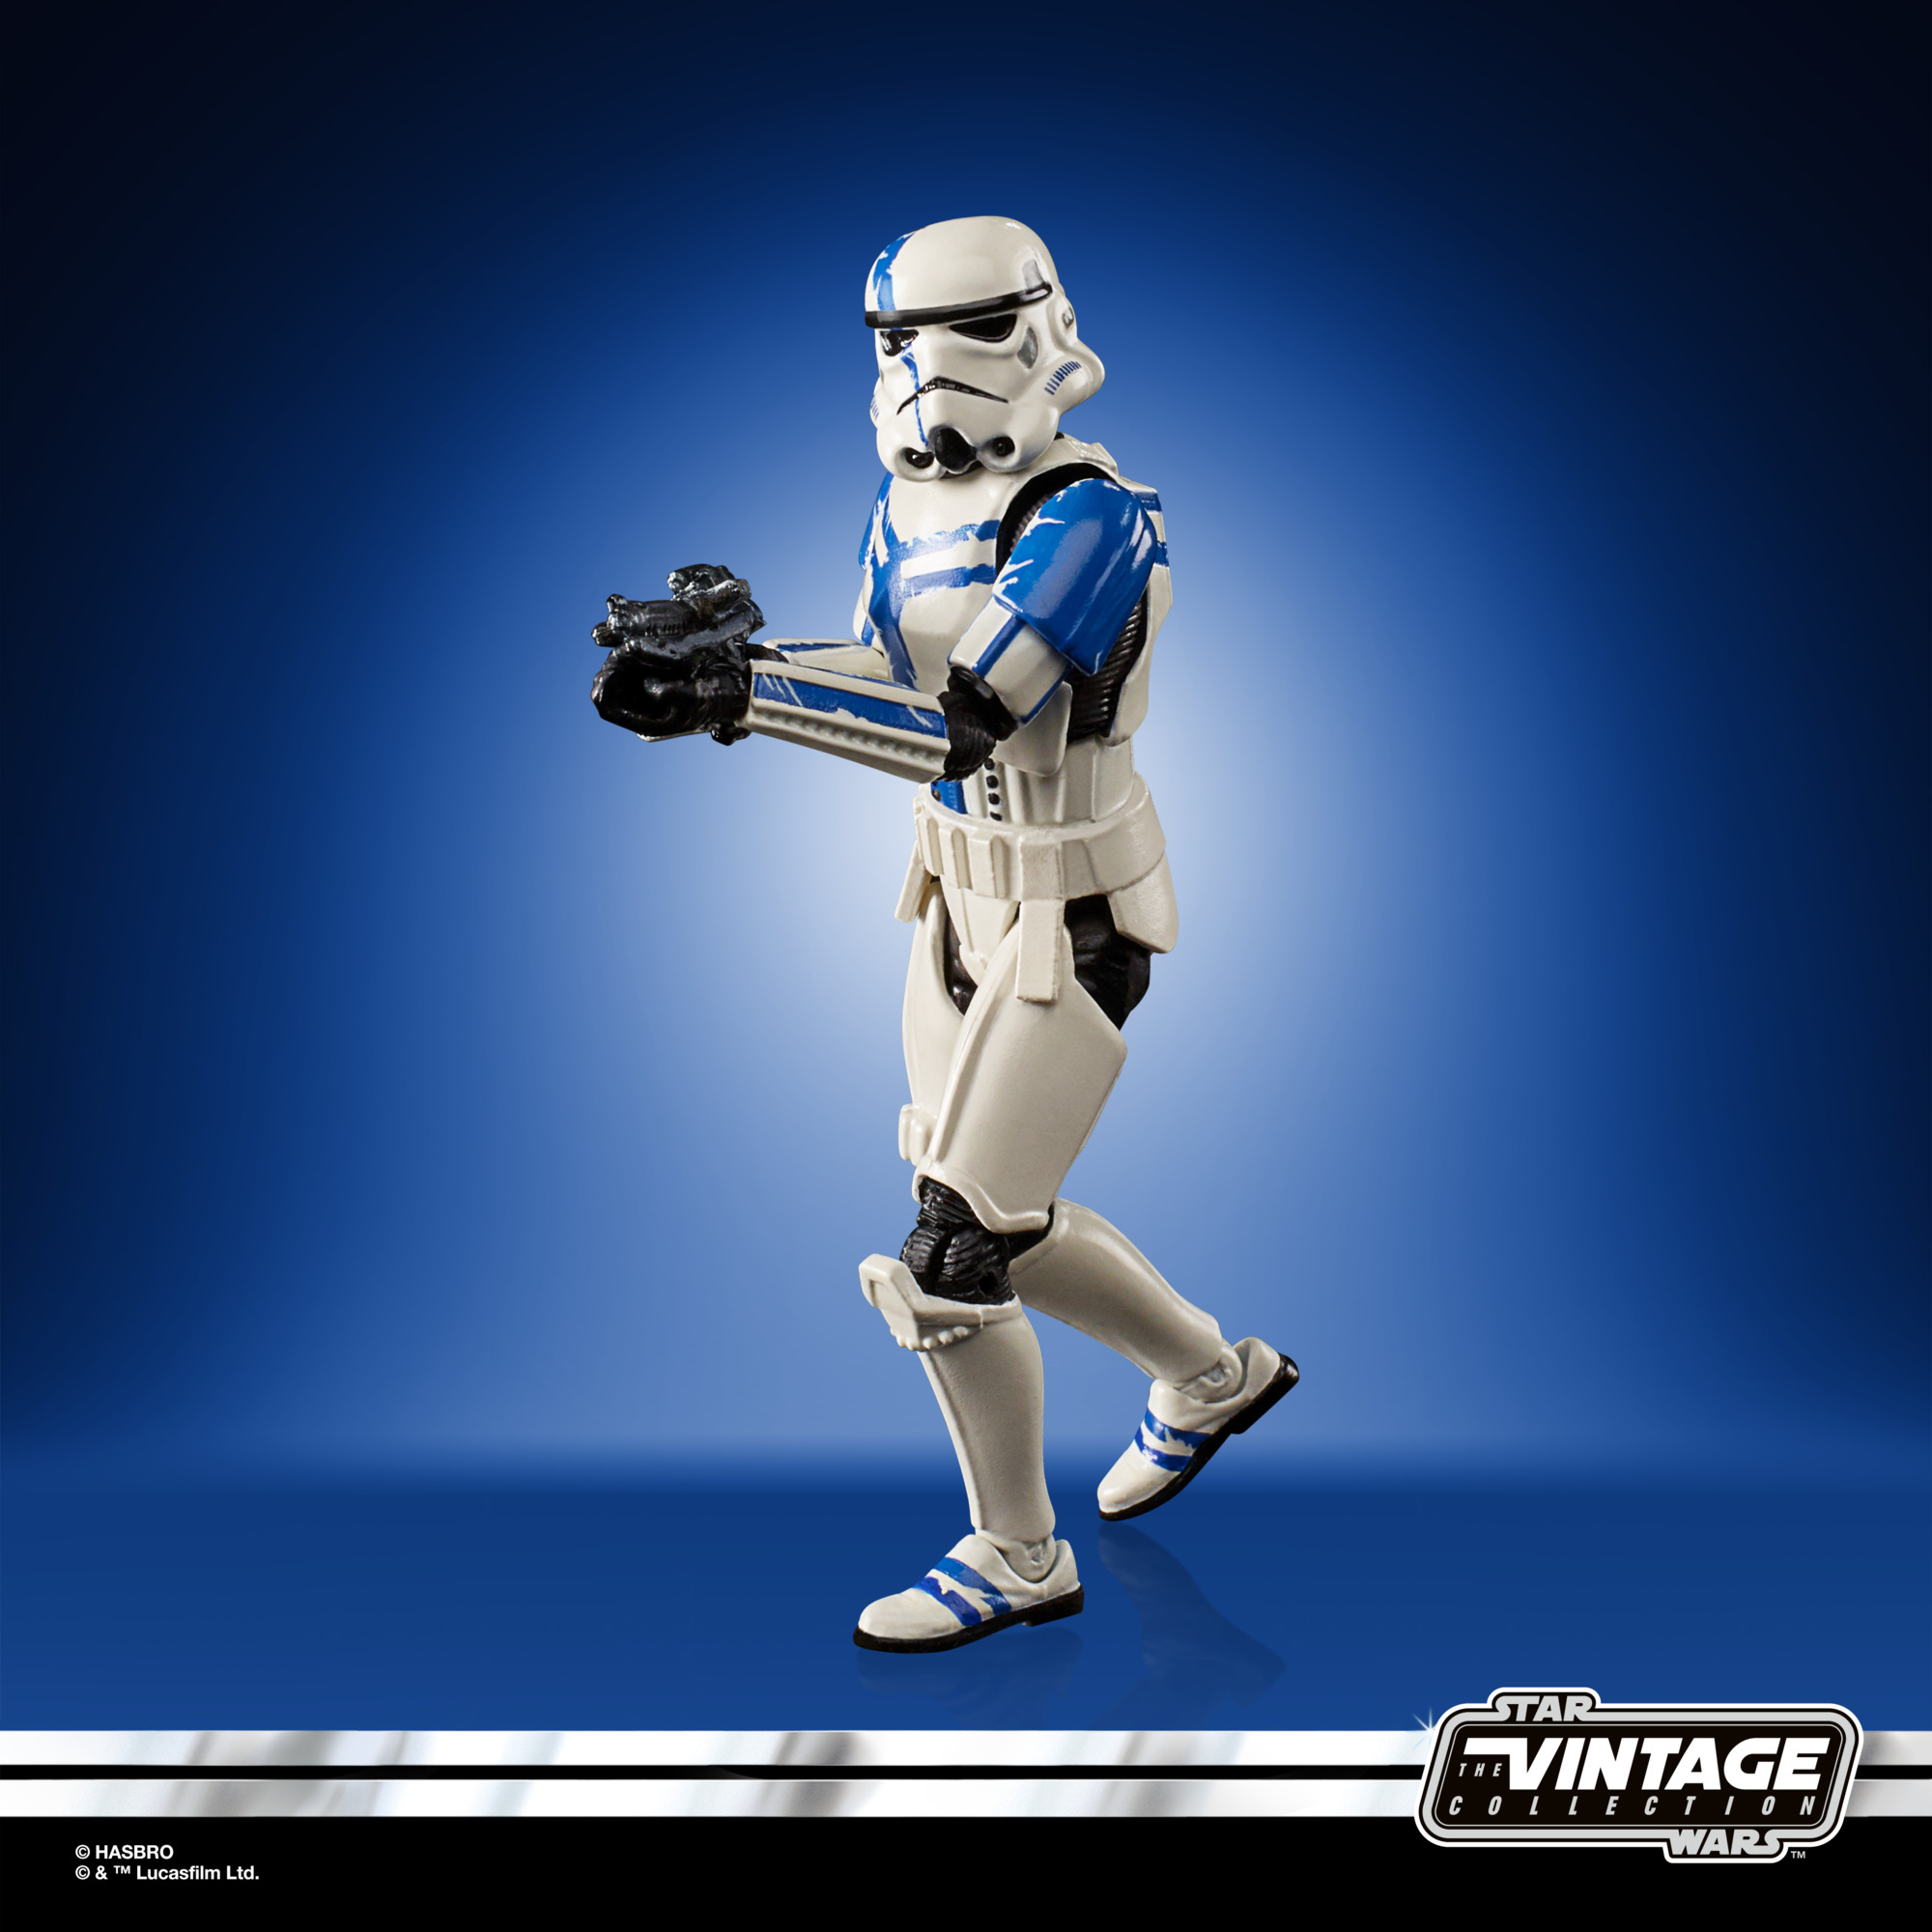 Star Wars The Vintage Collection Gaming Greats Stormtrooper Commander F55595L00 5010993967858